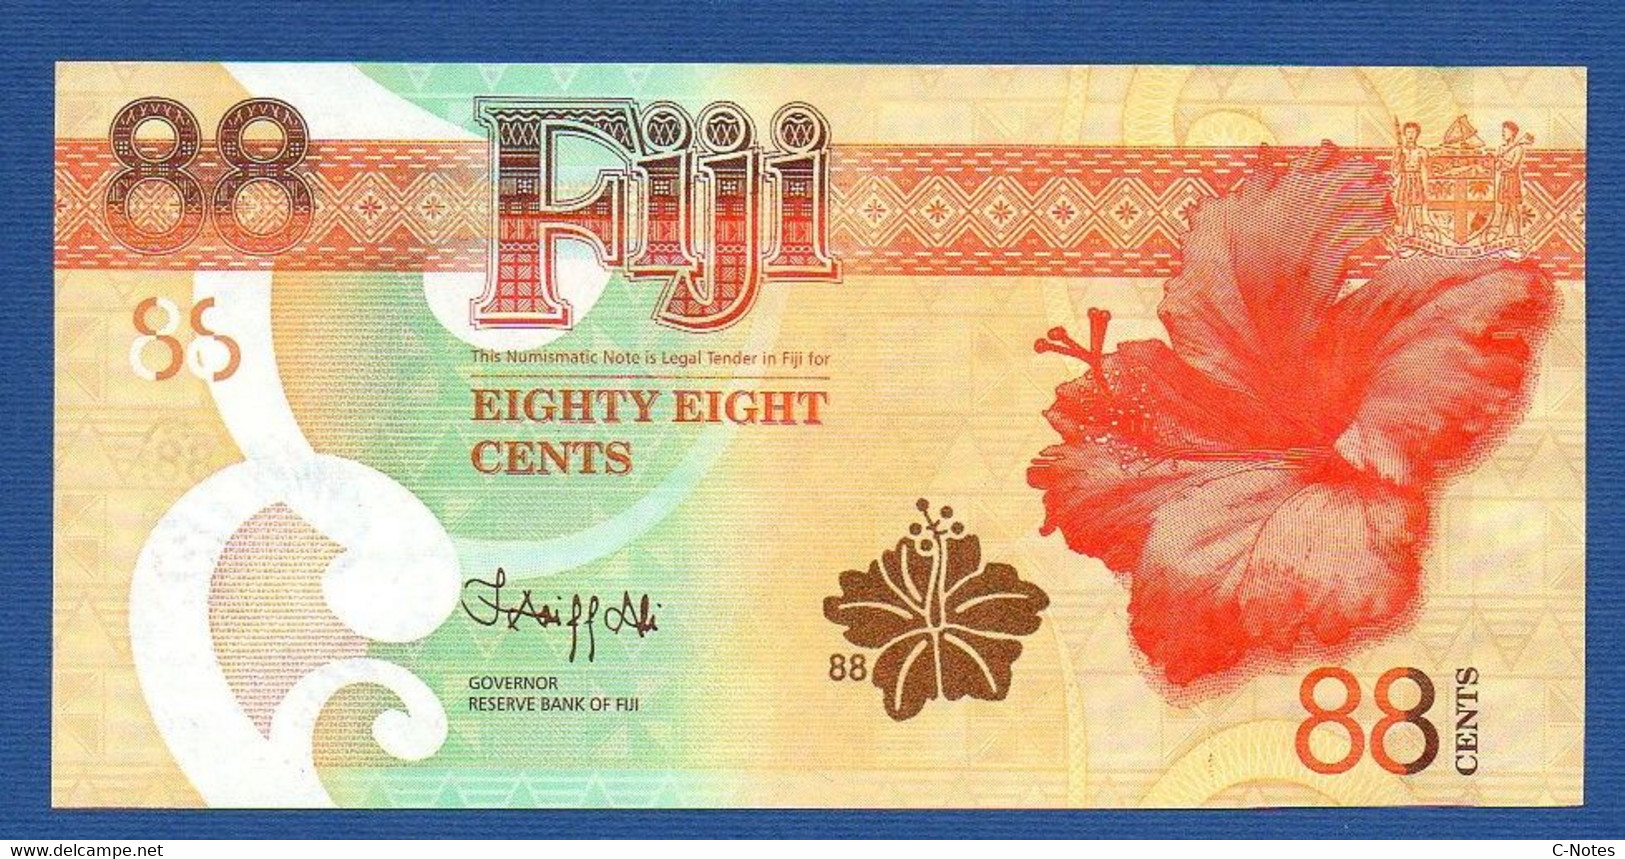 FIJI - P.W123 (1) – 88 Cents  ND (2022) UNC Serie AB19620231 "Numismatic Banknote 88 Cents" Commemorative Issue - Fidschi